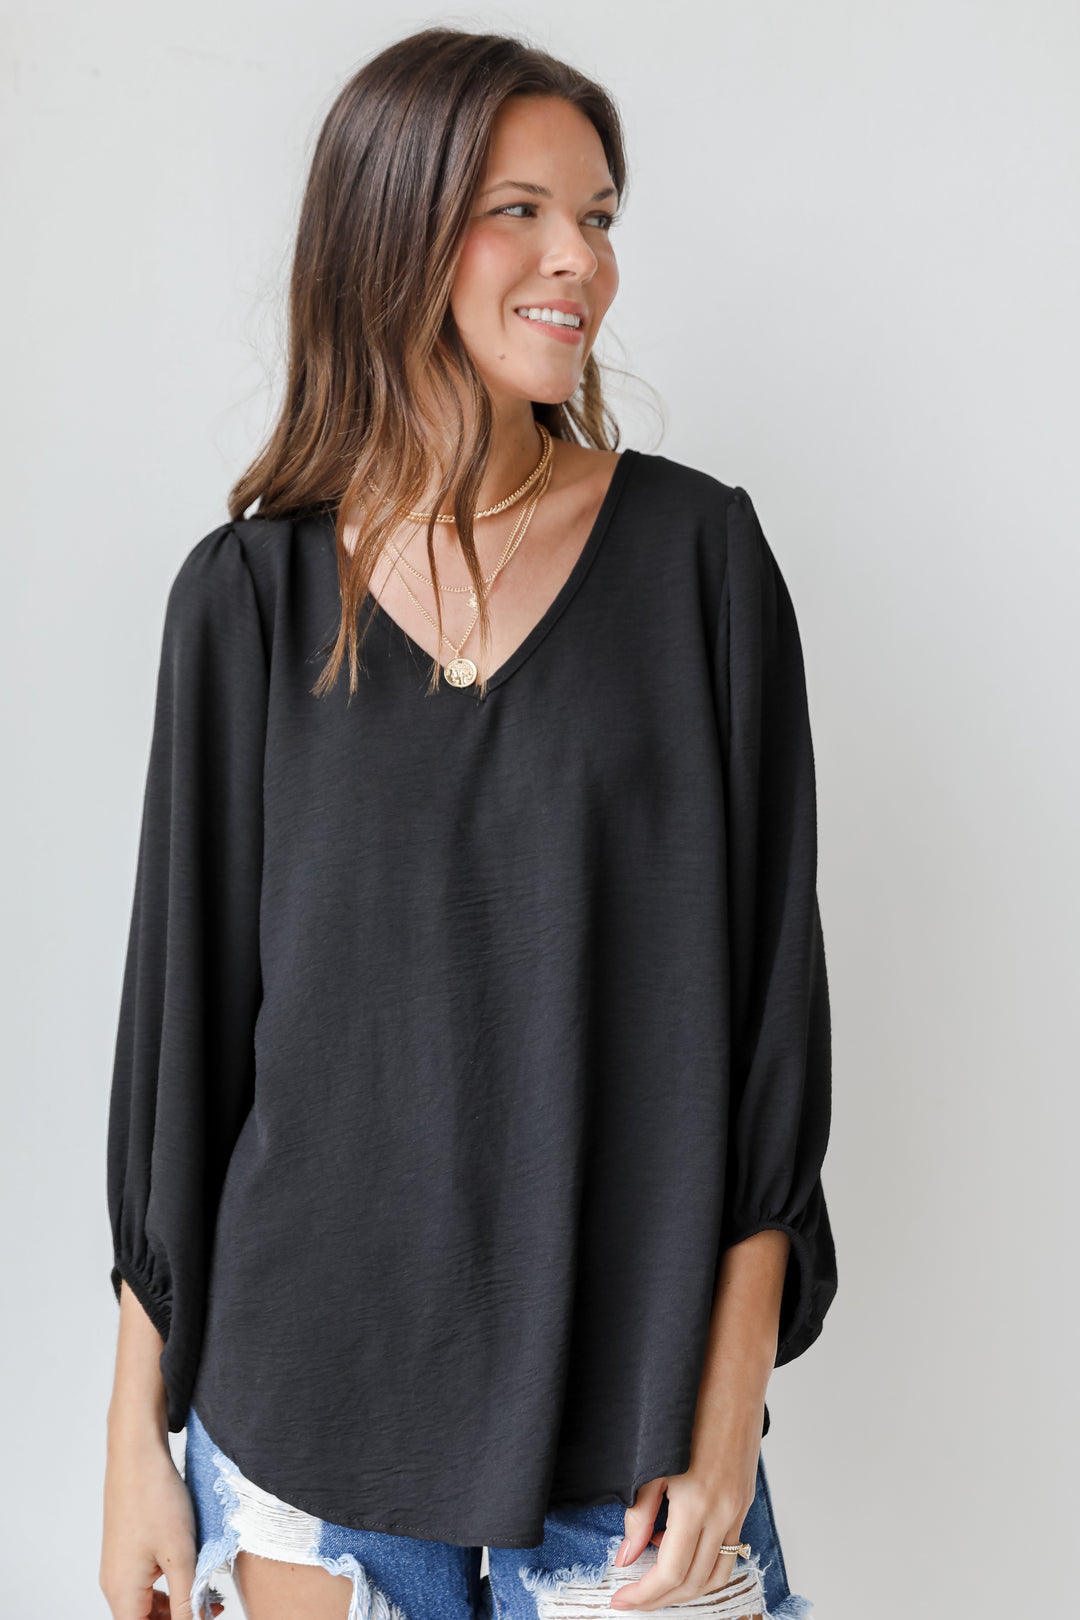 Blouse in black front view